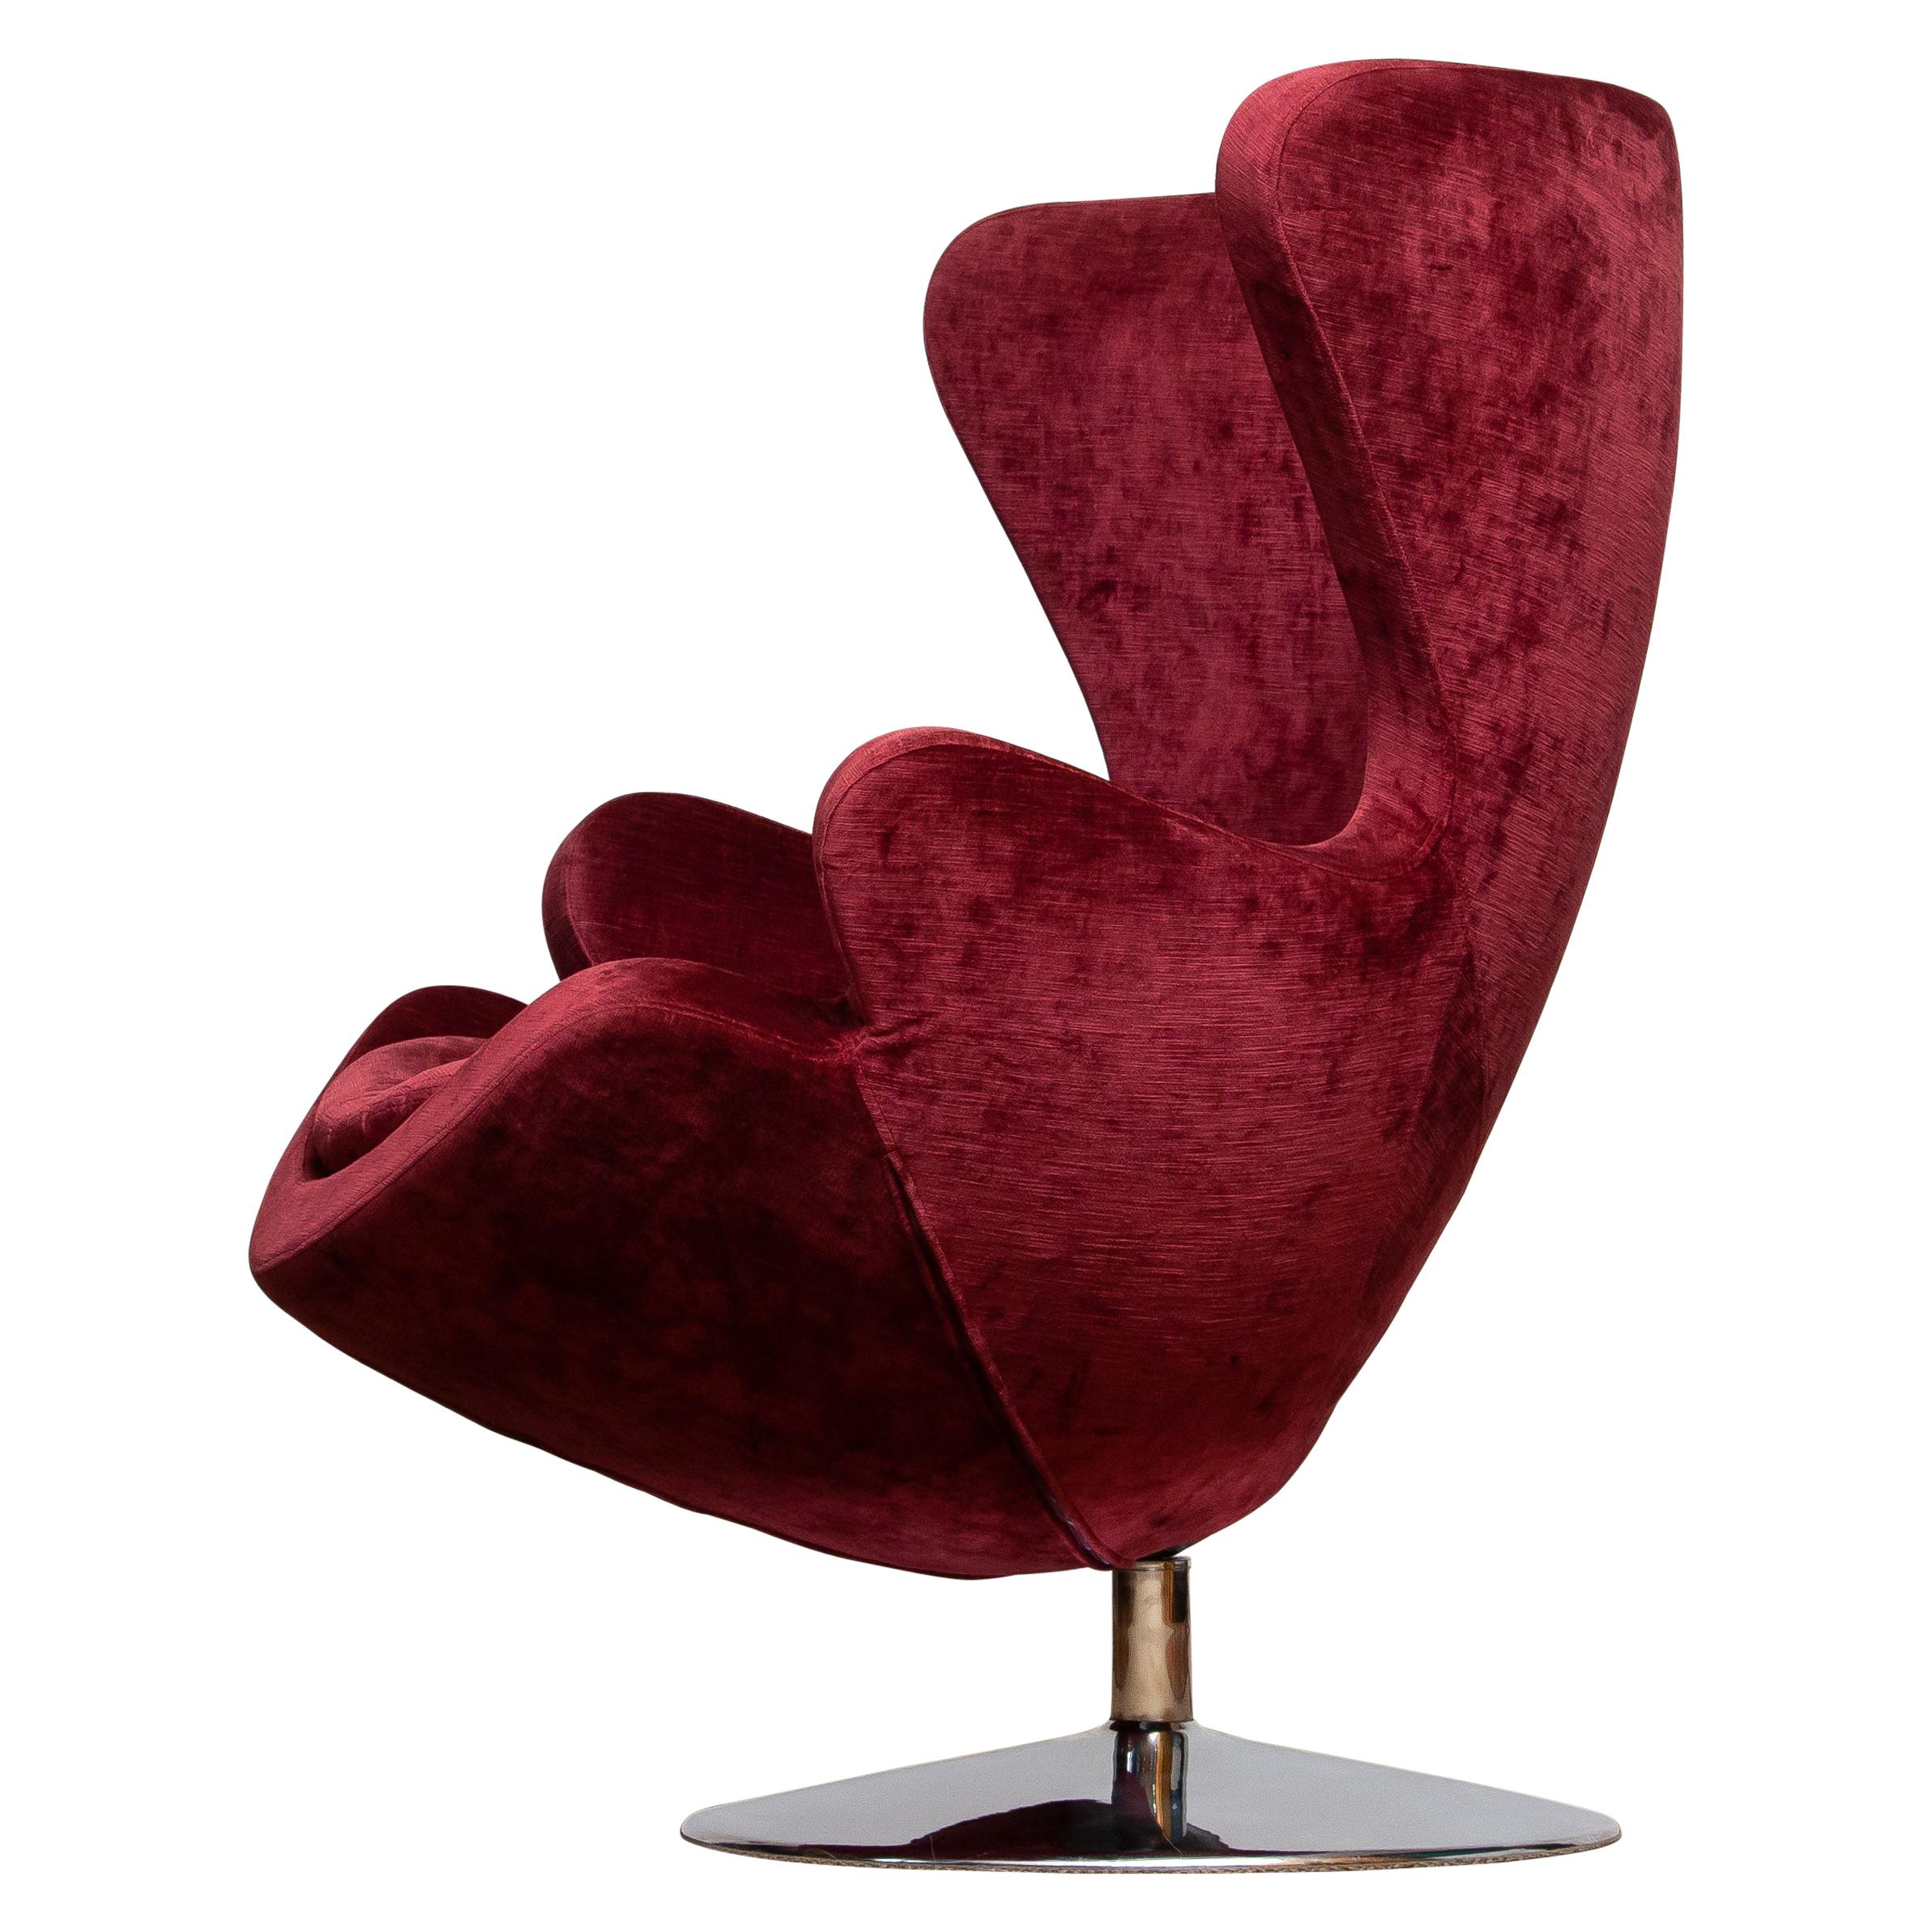 Mid-Century Modern 1970s, Swivel Lounge Egg Chair on Chrome Stand Colored in Bordeaux Red Baby Roy